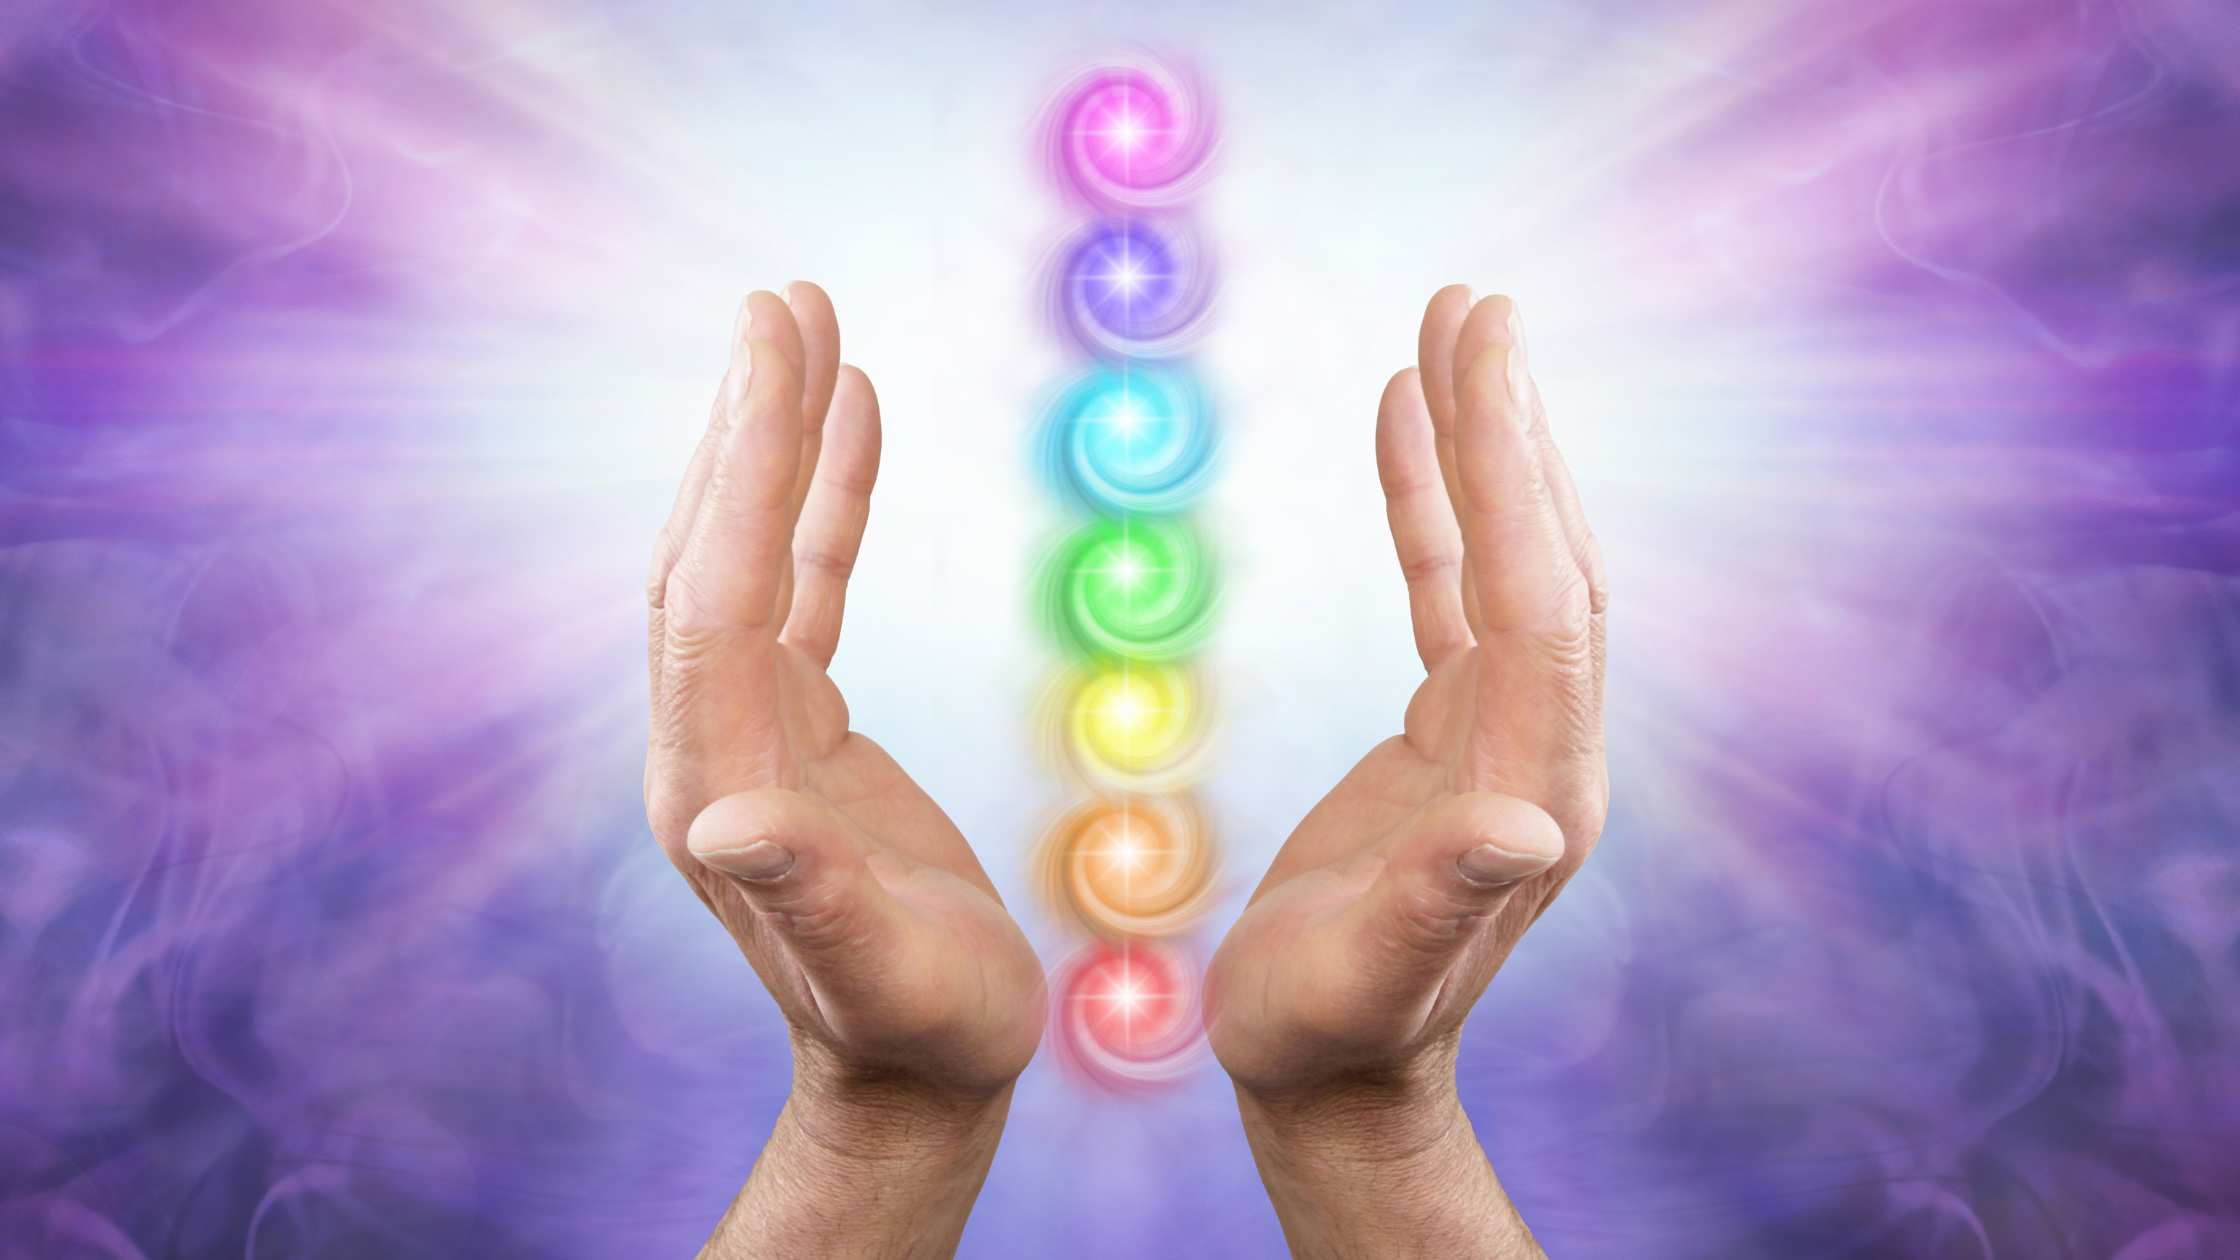 Learn simple ways on How to Heal Yourself – The Essence of Reiki Healing